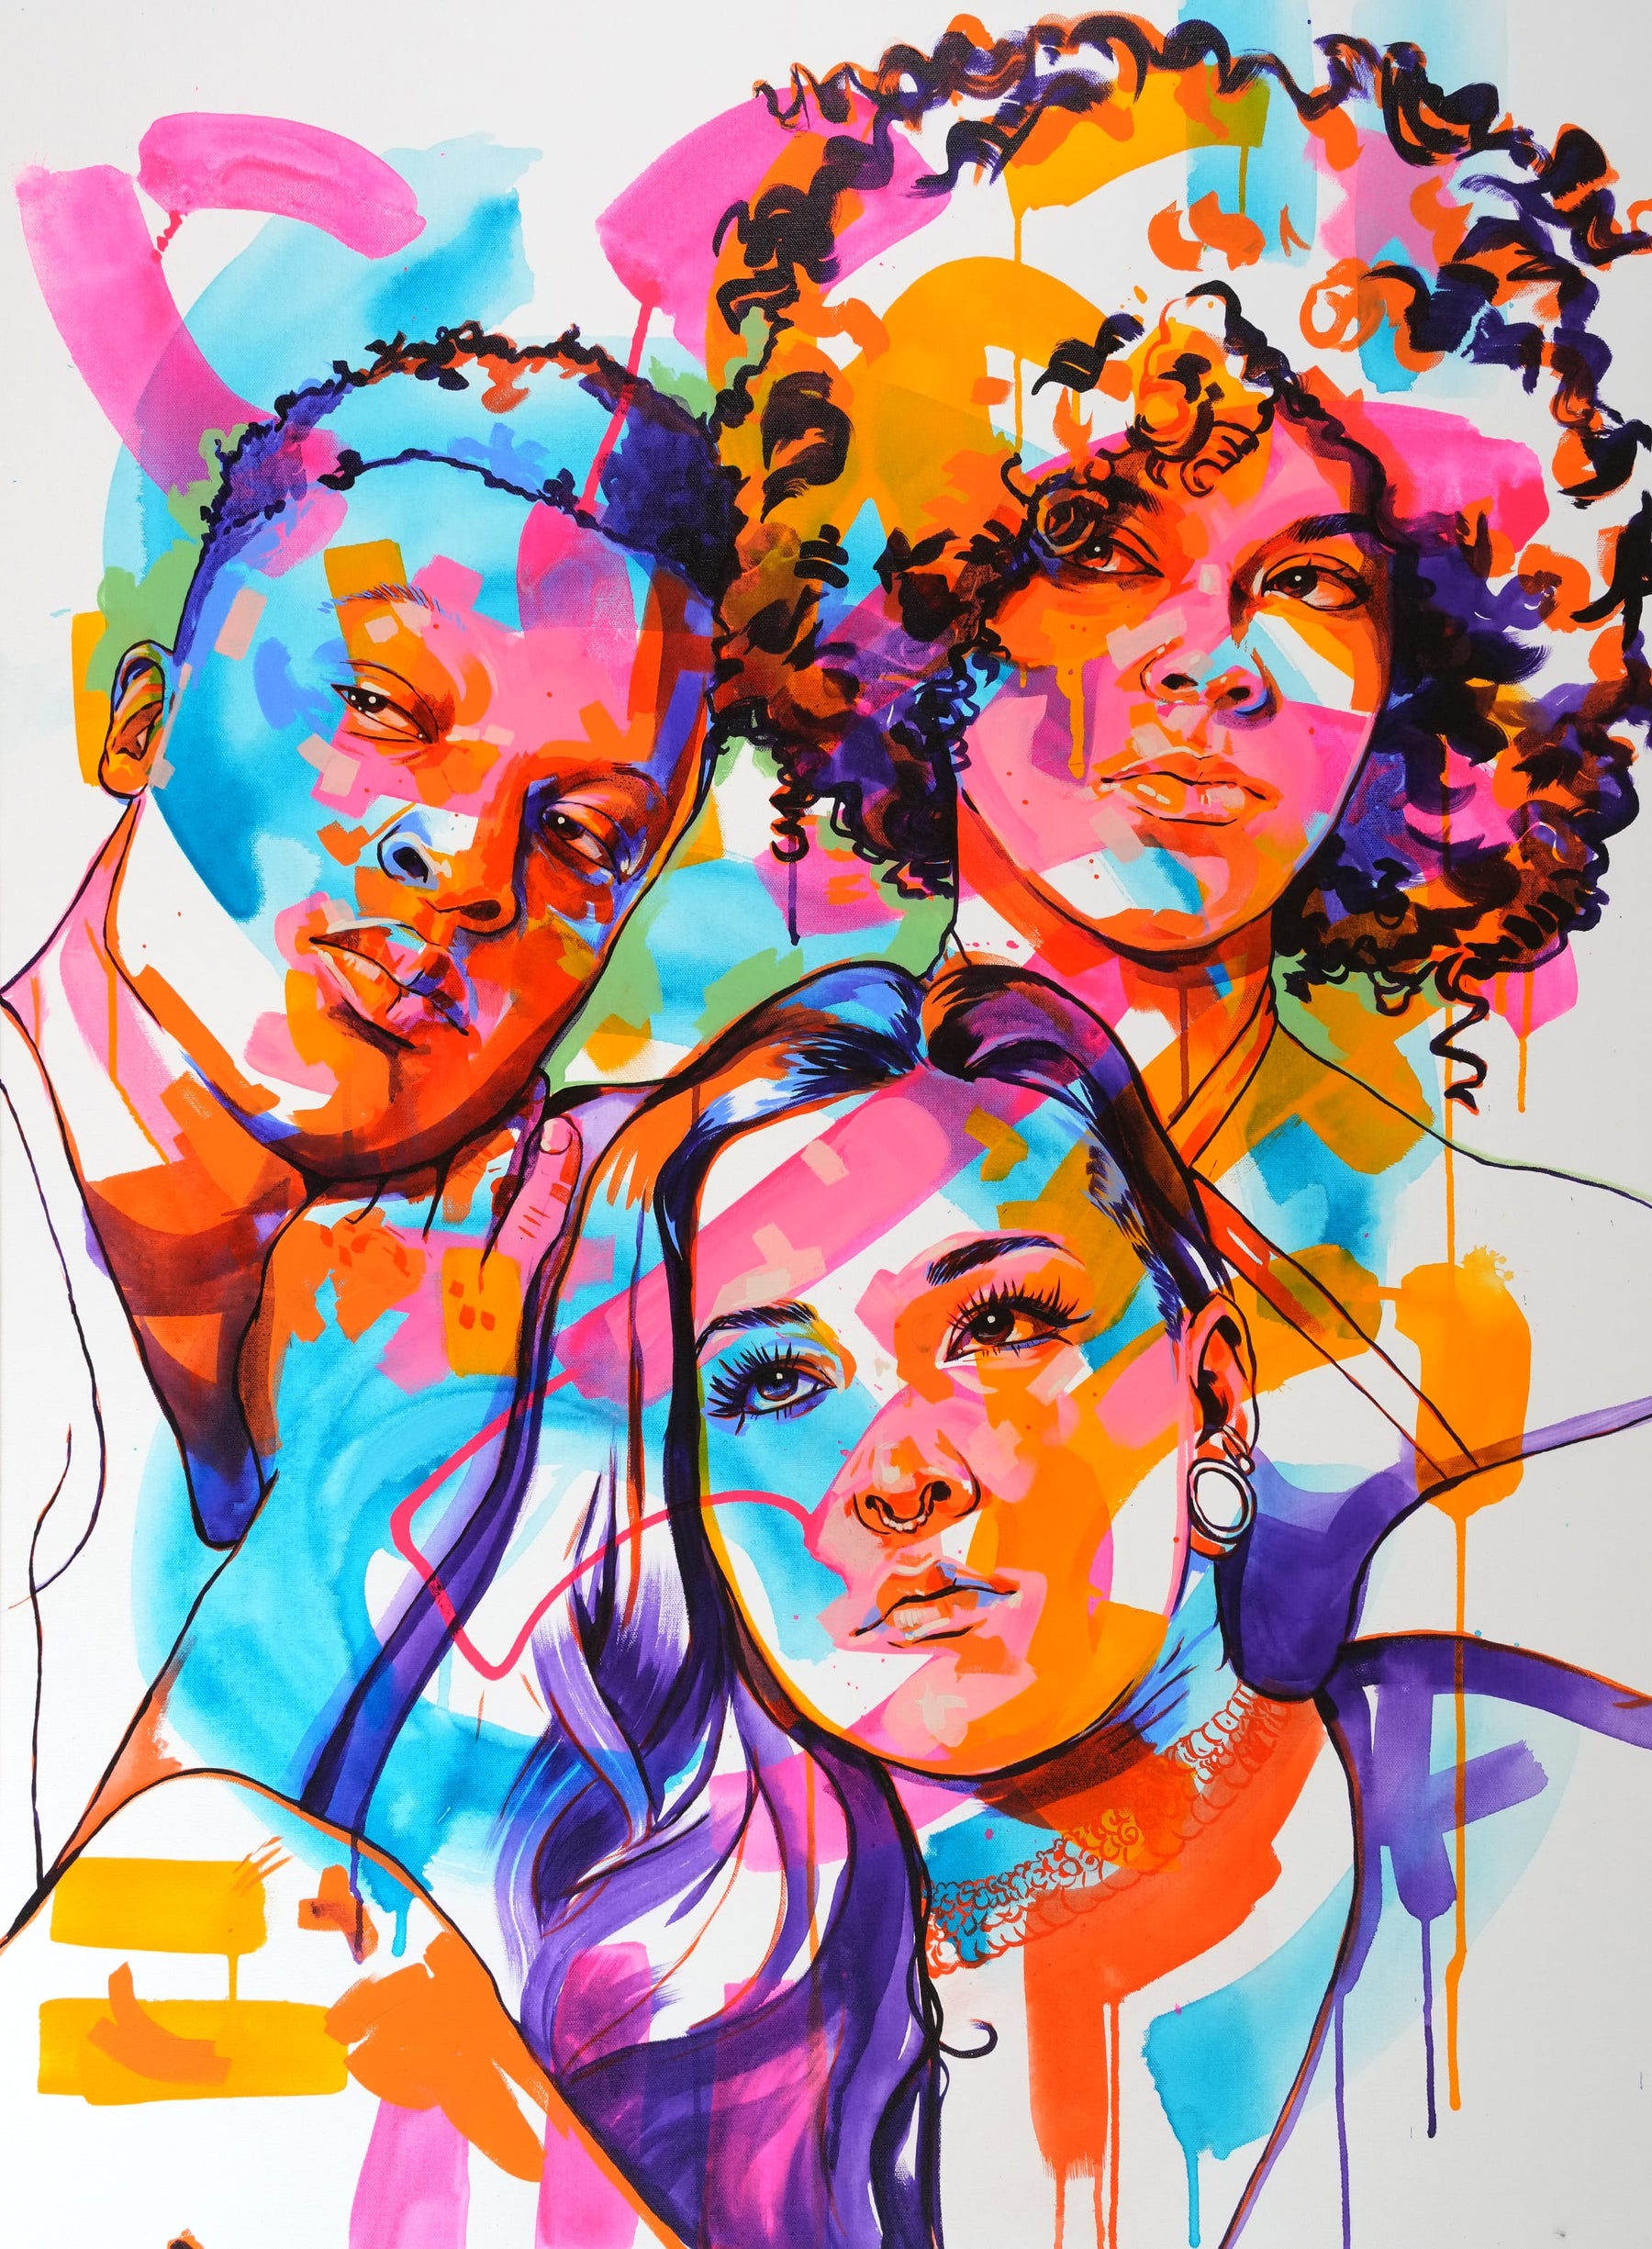 The Tracy Piper's vibrant figurative painting of three people.